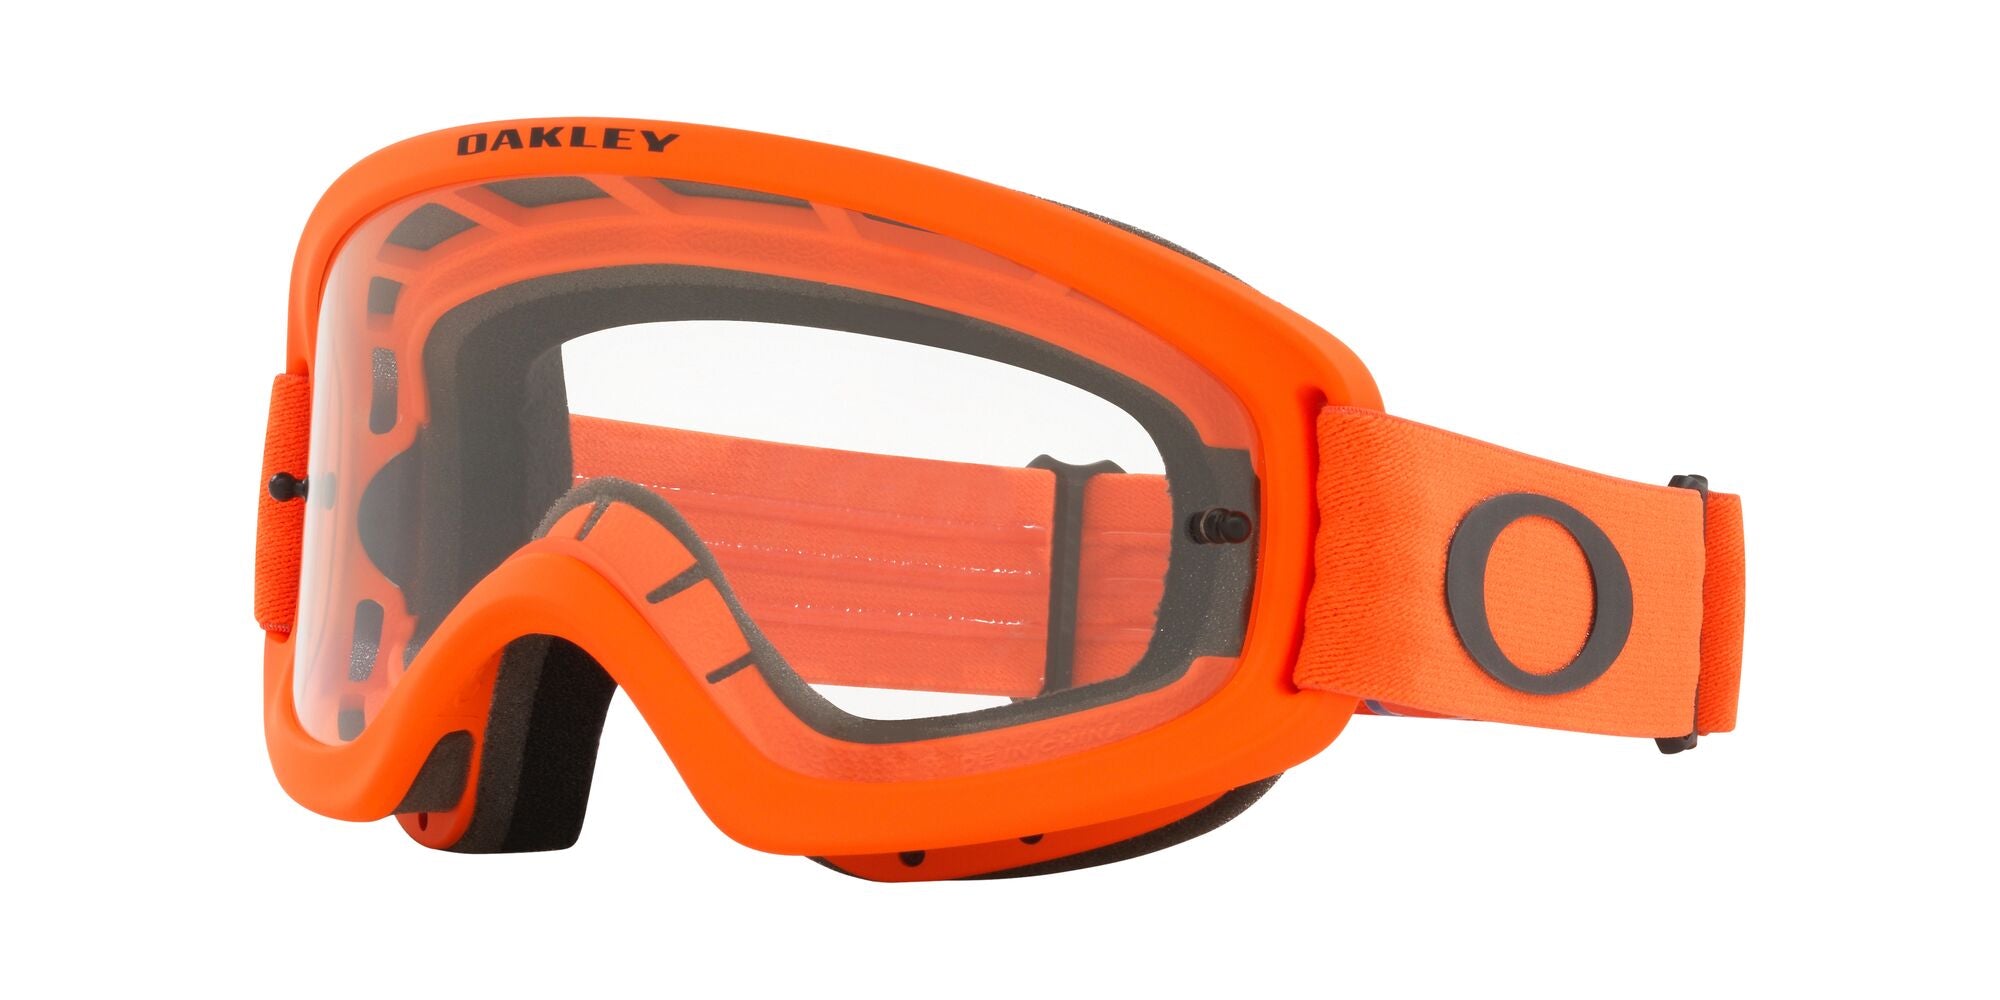 Oakley O Frame 2.0 Pro XS MX Goggle in Moto Orange with Clear Lens on White Background